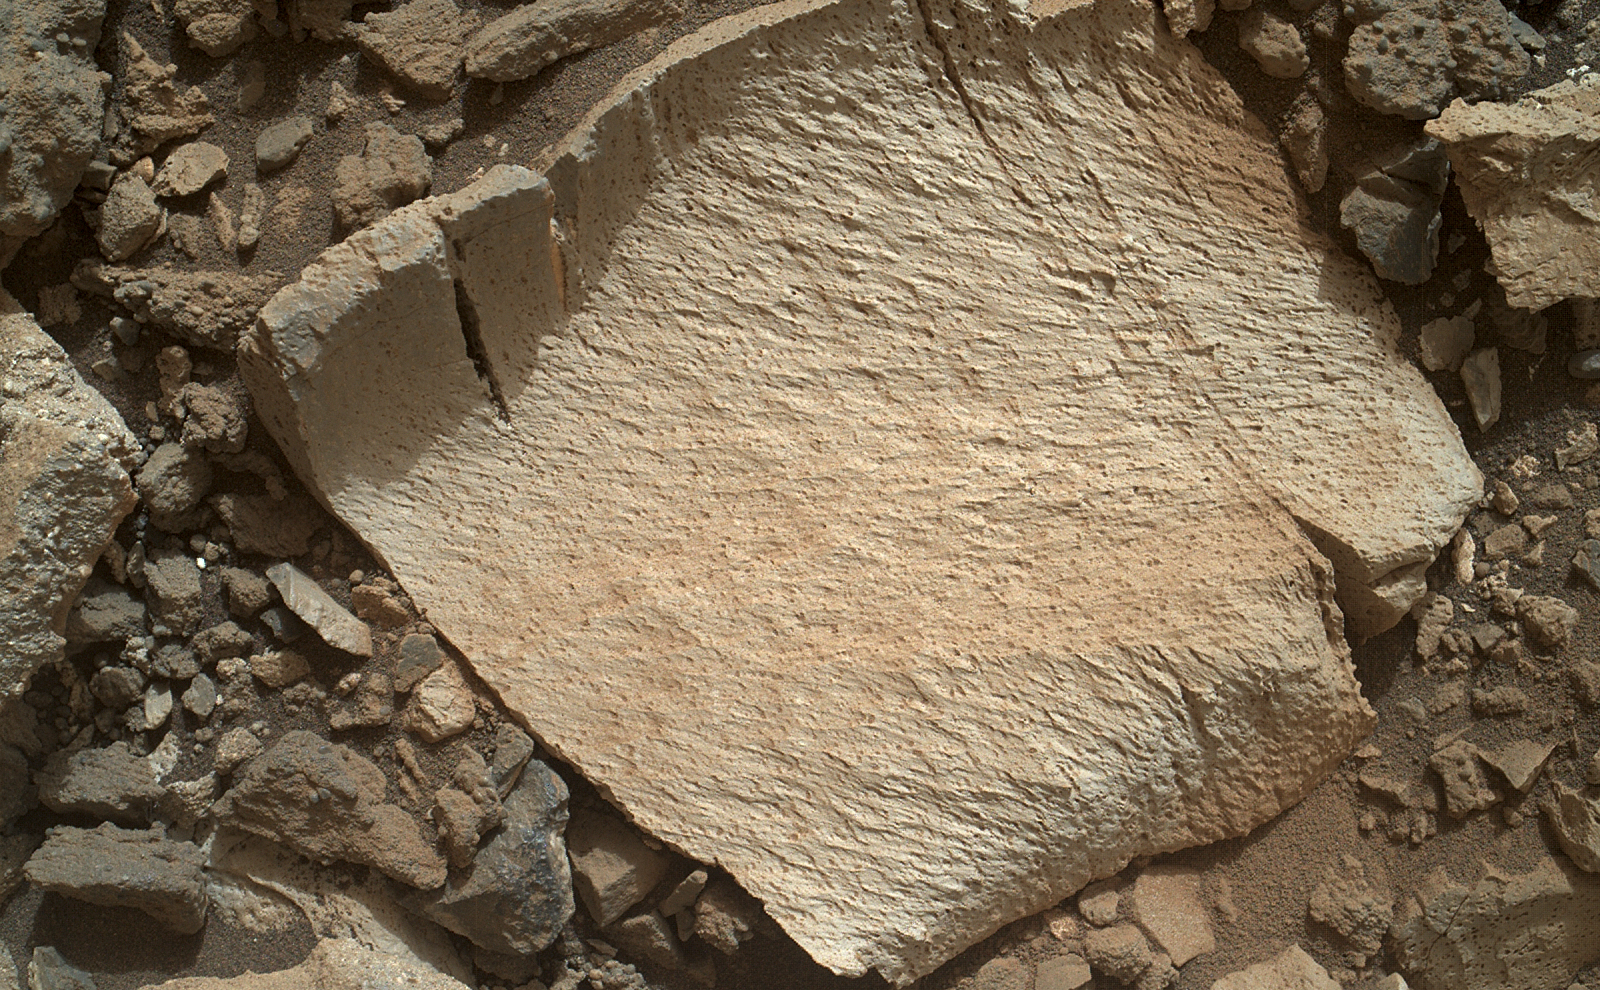 A rock fragment dubbed "Lamoose" is shown in this picture taken by the Mars Hand Lens Imager (MAHLI) on NASA's Curiosity rover.